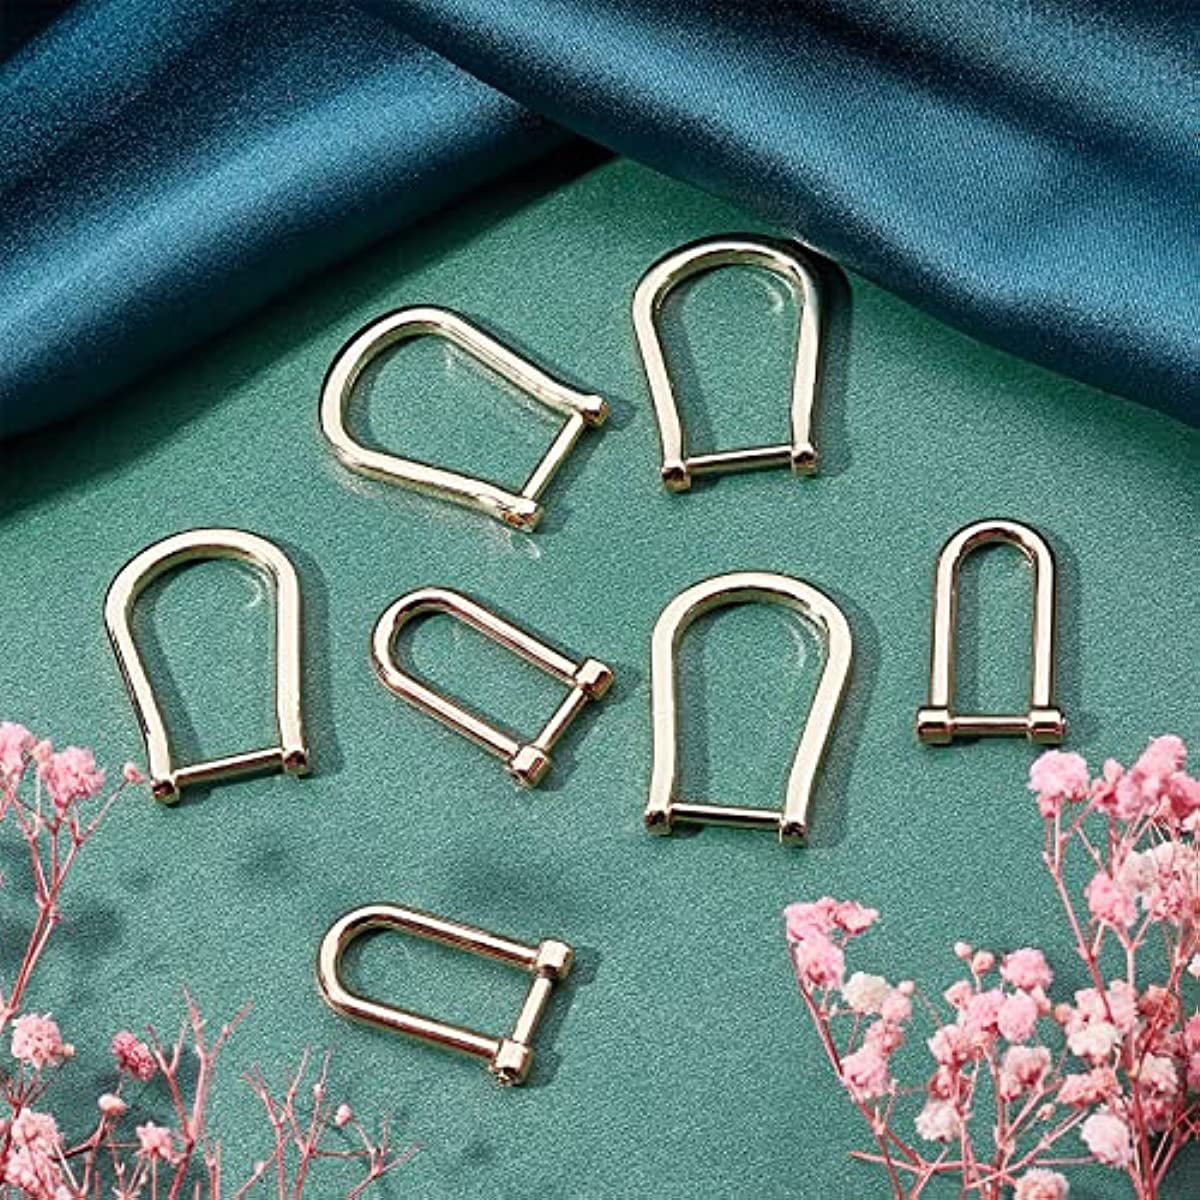 Bobeey 4pcs 1 inch D-Rings Horseshoe Shape D Ring,U Shape D Rings,Screw in  Shackle Horseshoe Shape D Ring DIY Leather Craft Purse Keychain Accessories